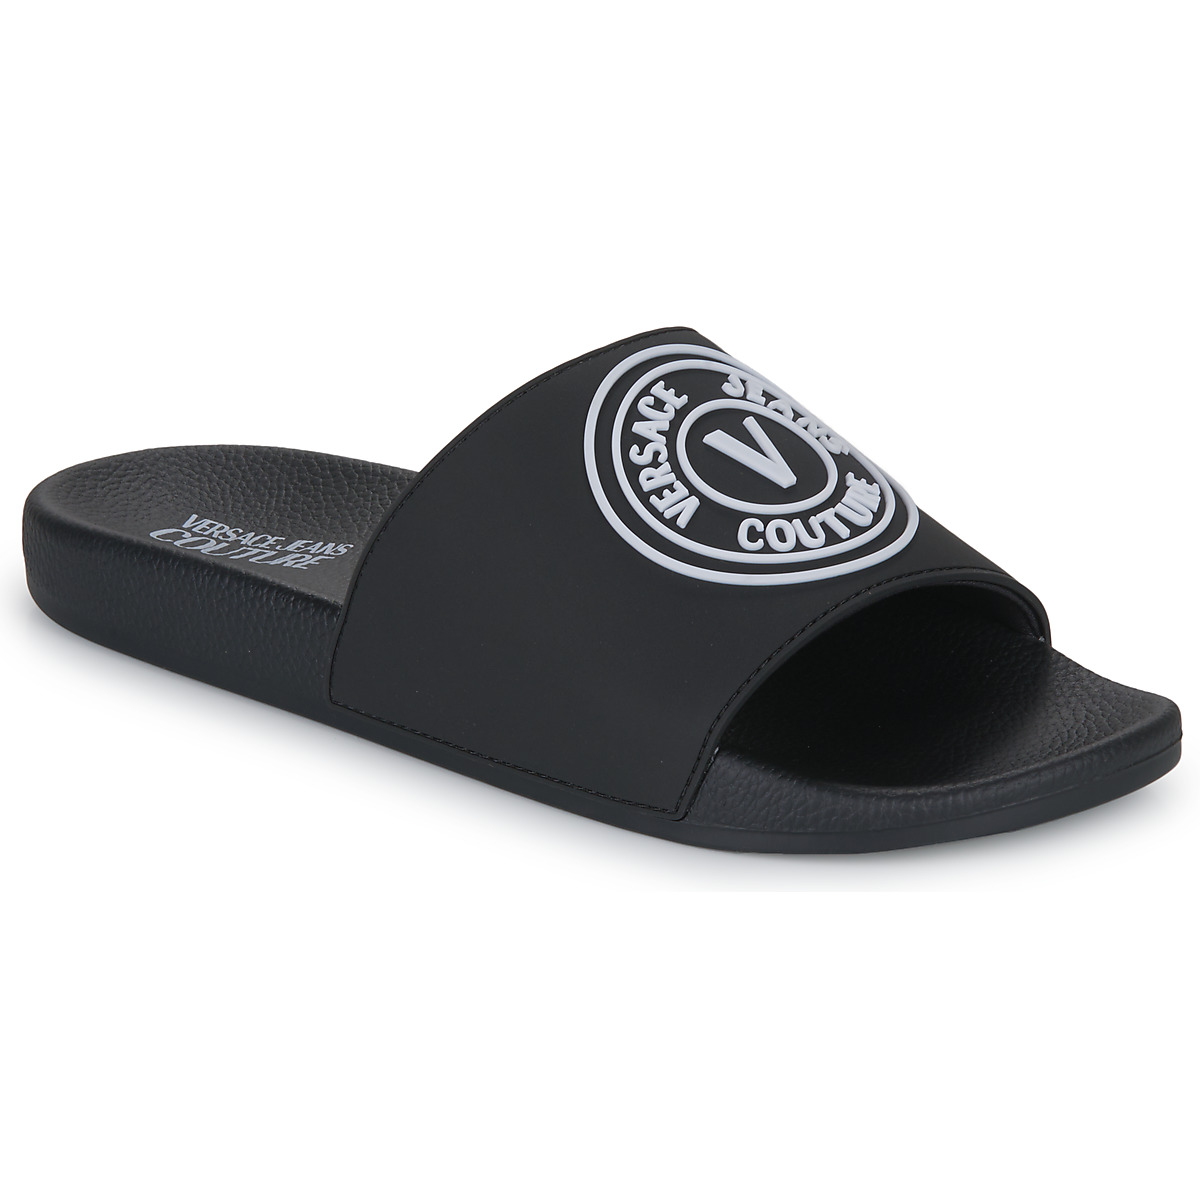 Shoes Men Sliders Versace Jeans Couture 74YA3SQ3-ZS192 Black / White